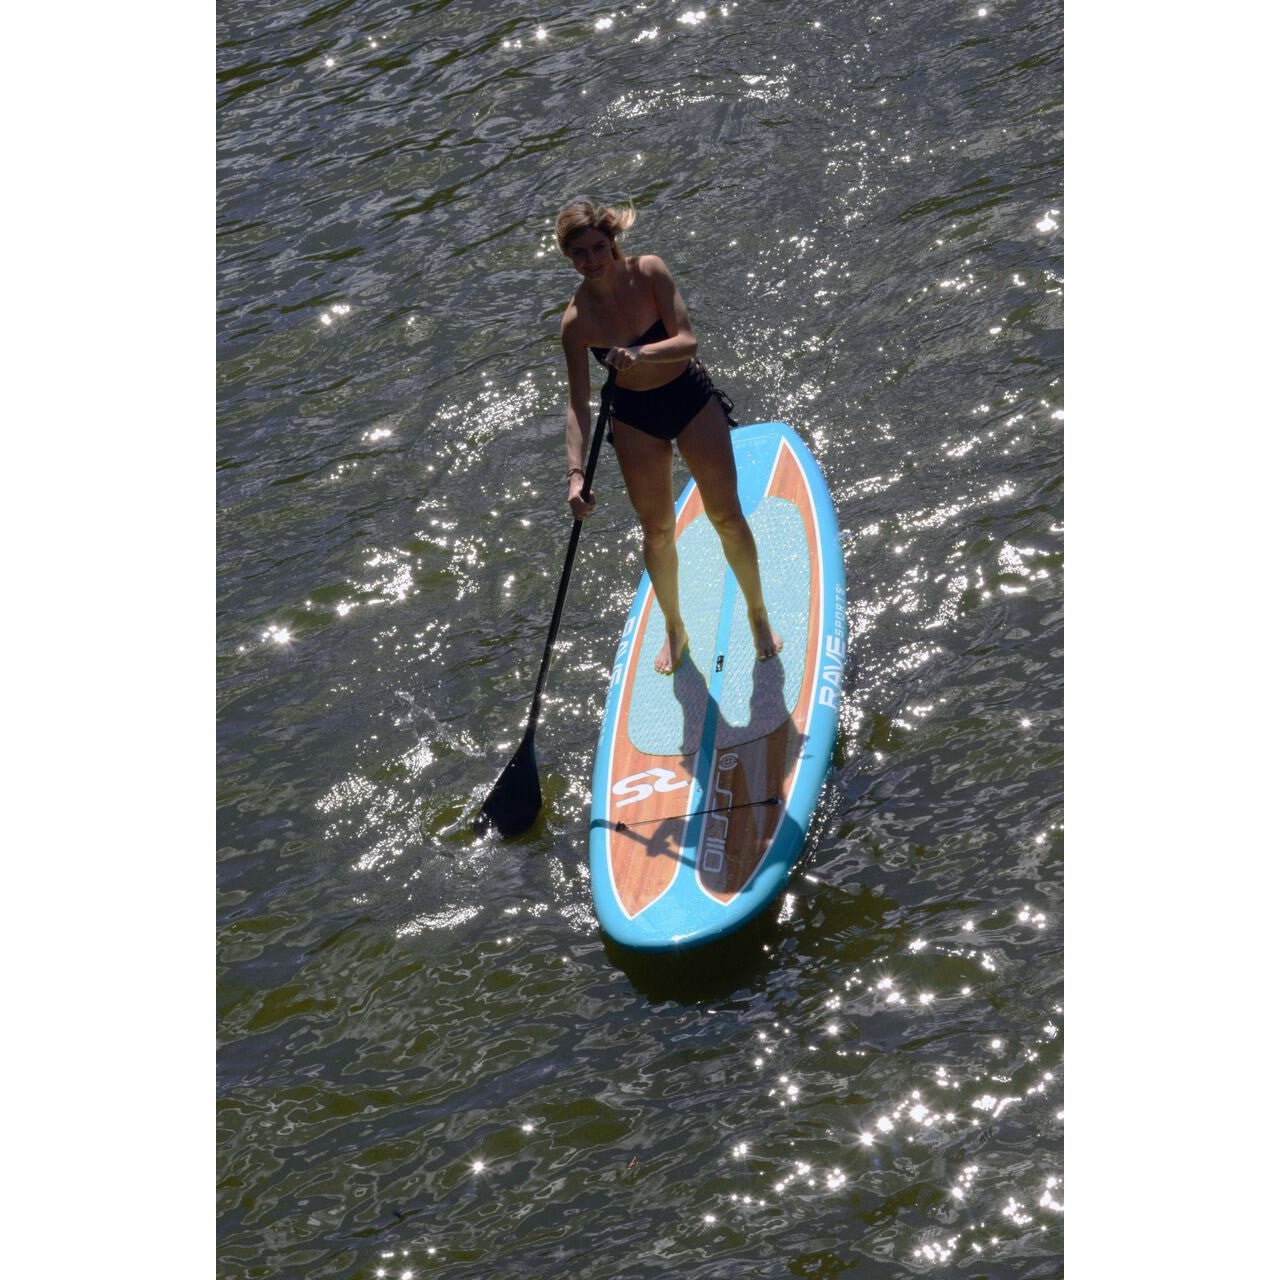 Rave Sports Shoreline Series SS110 Stand Up Paddle Board SUP - 02728 -  Kayak Creek